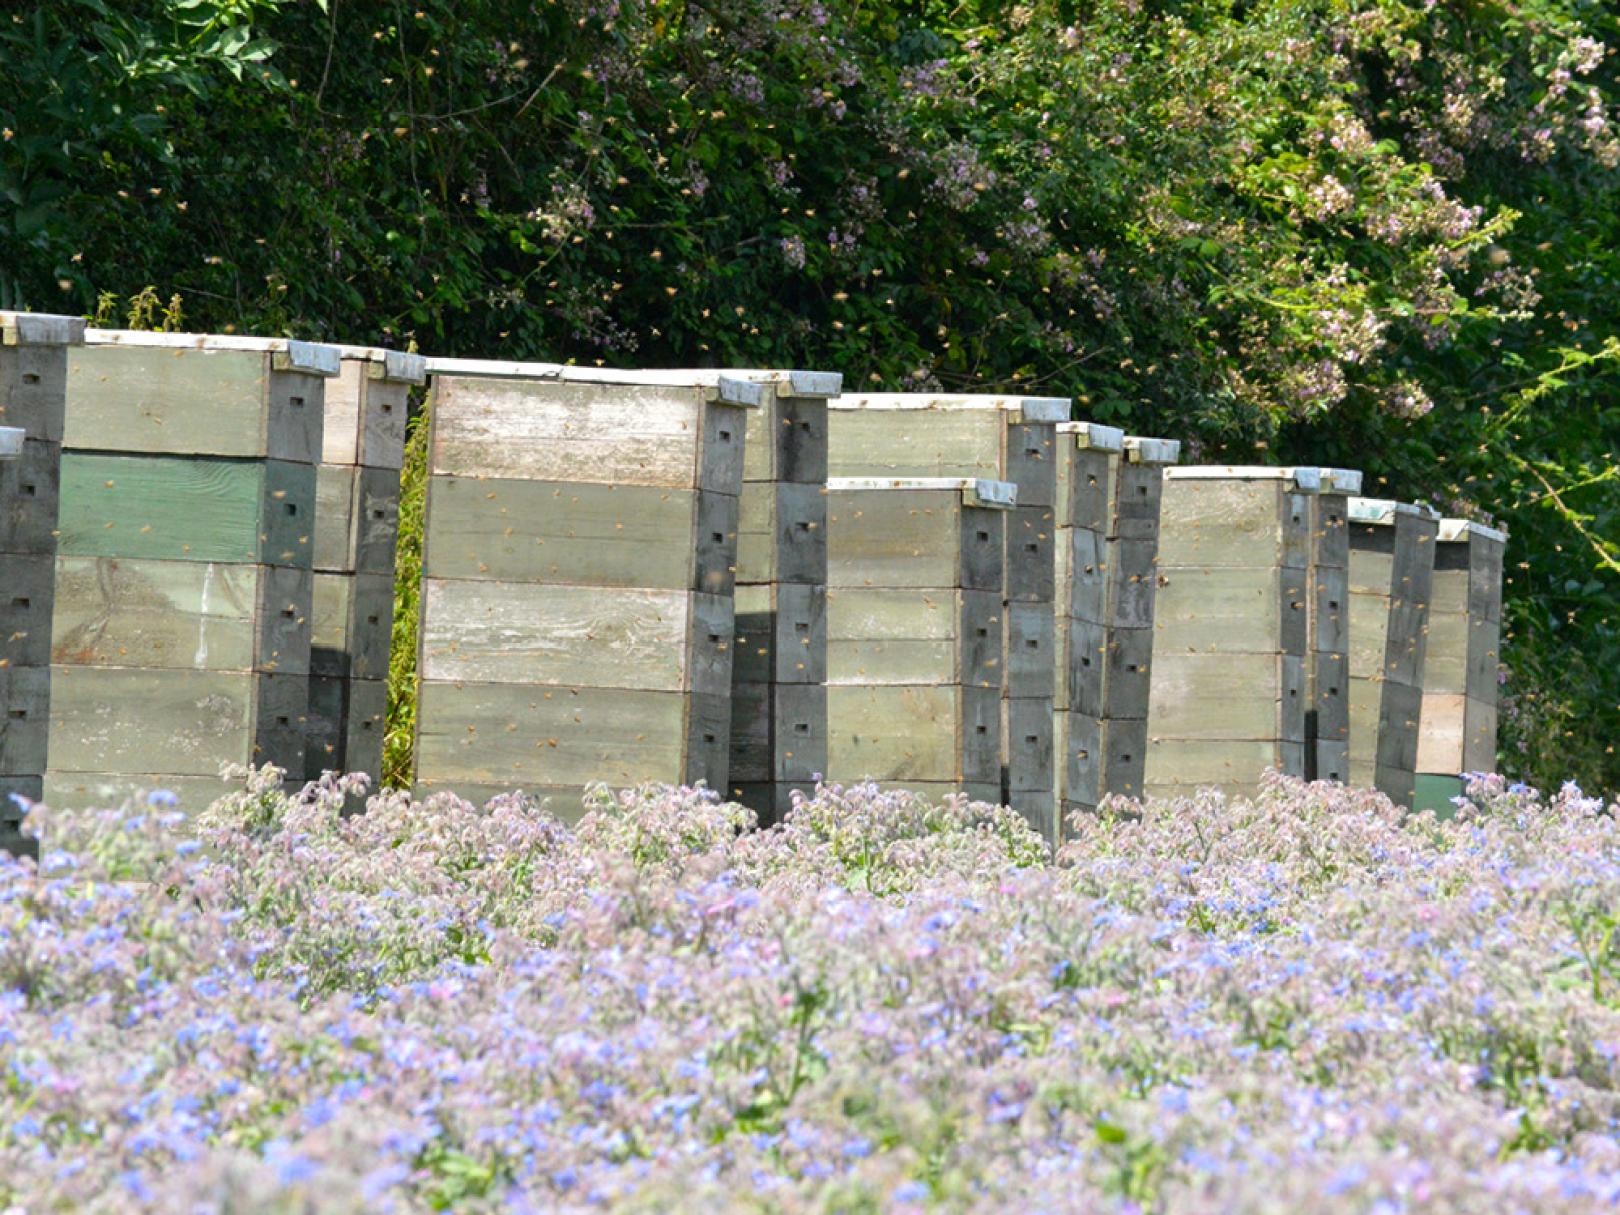 Boxes of Bees in Field